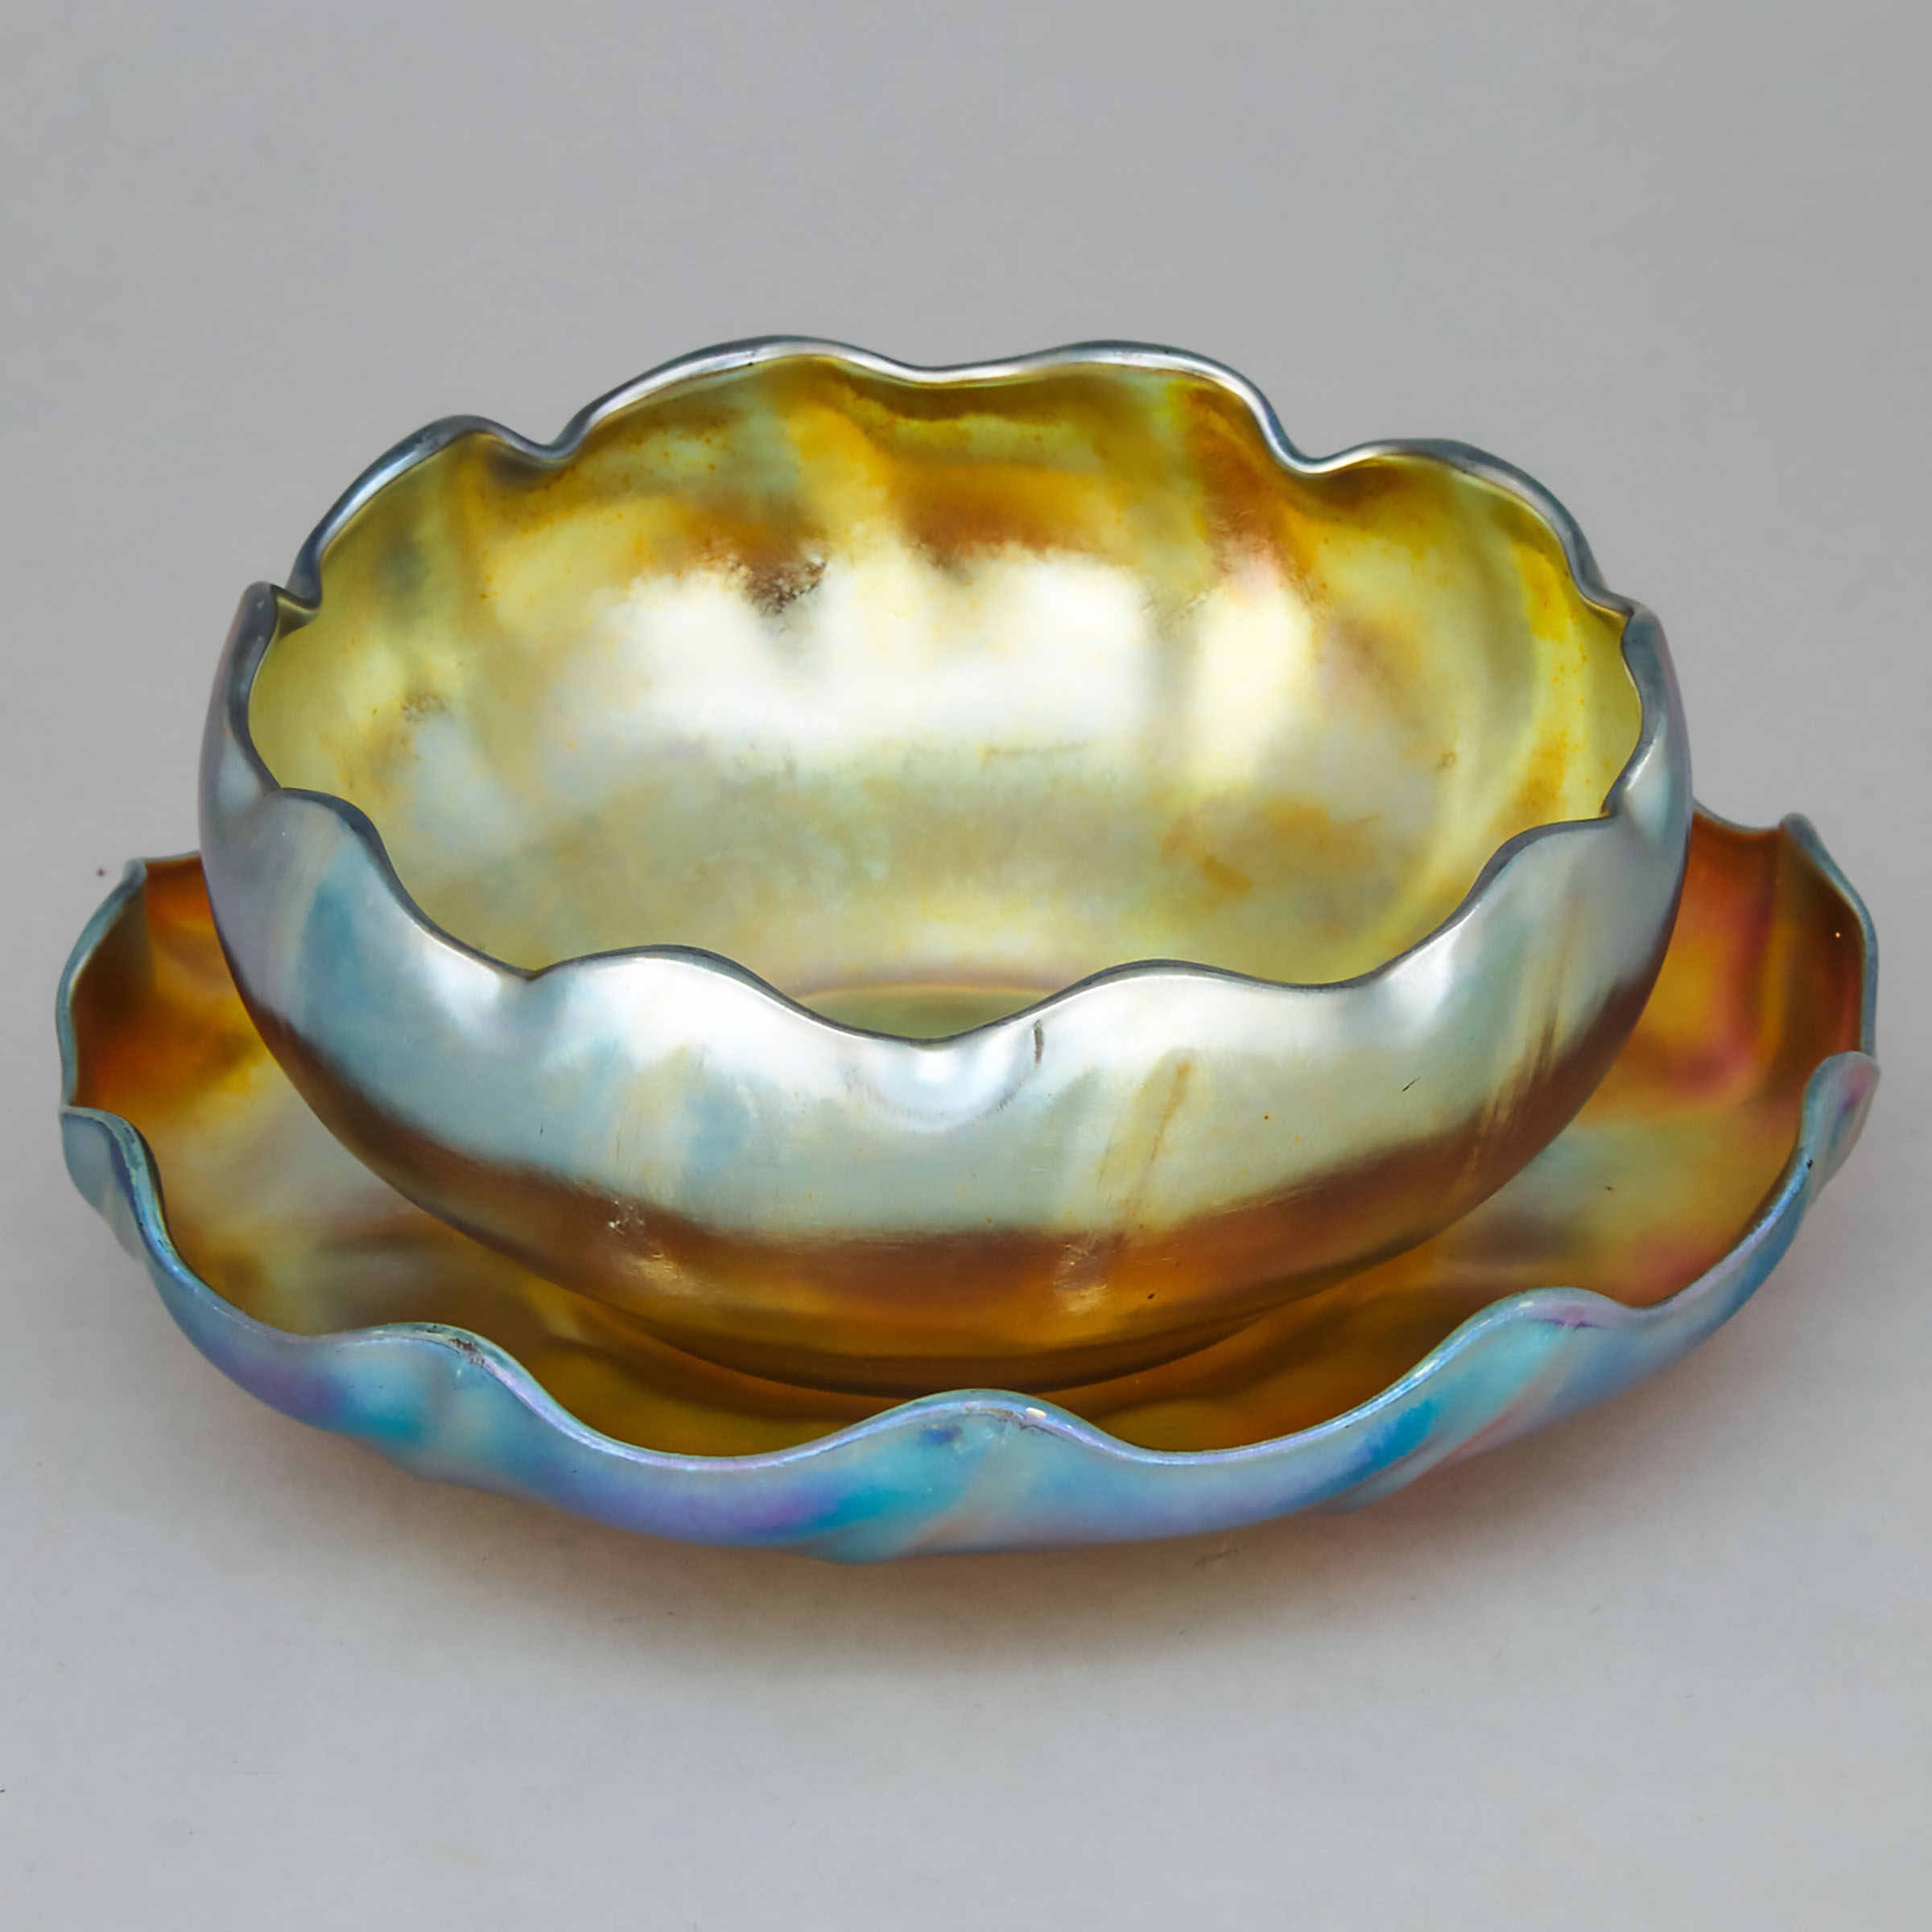 Tiffany 'Favrile' Iridescent Glass Finger Bowl and Stand, early 20th century